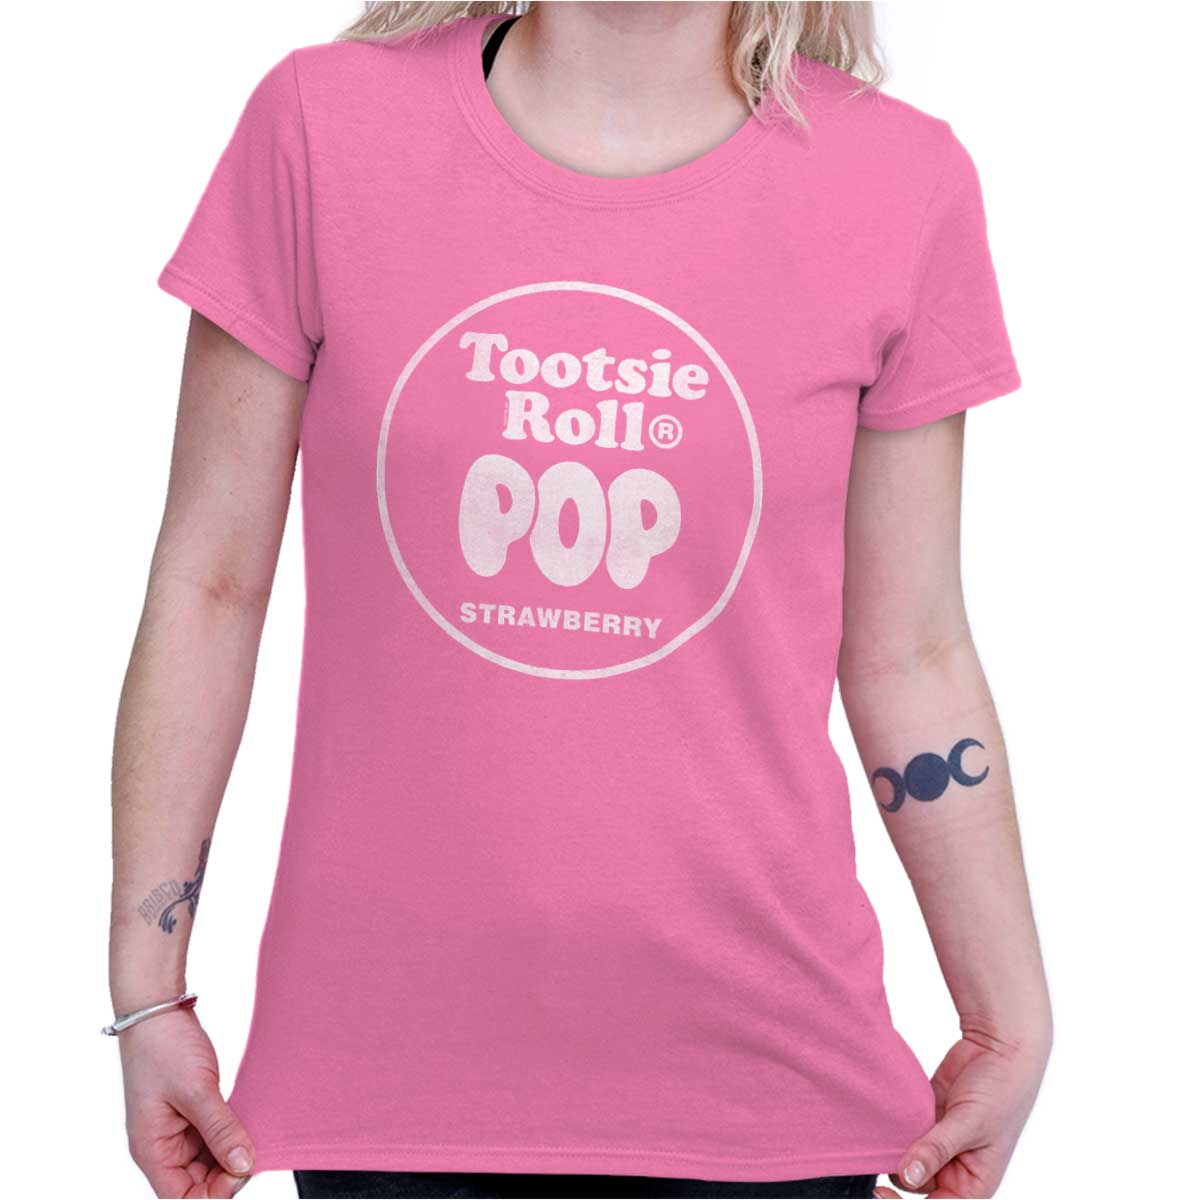 Vintage Retro Tootsie Roll Pop Strawberry Graphic T Shirts for Women T ...